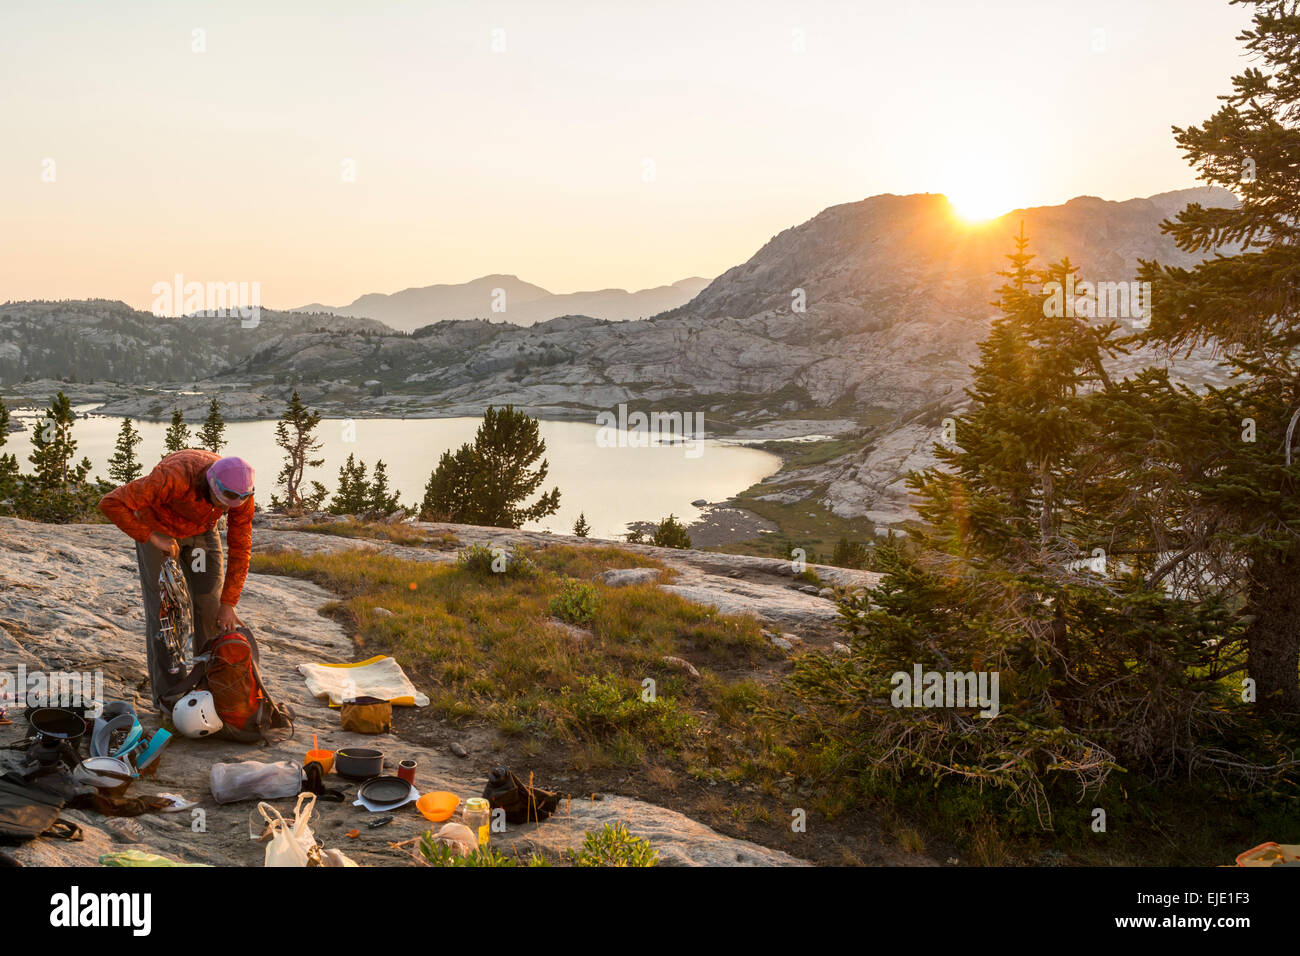 A woman packing camp in Titcomb Basin, Wind River Range, Pinedale, Wyoming. Stock Photo